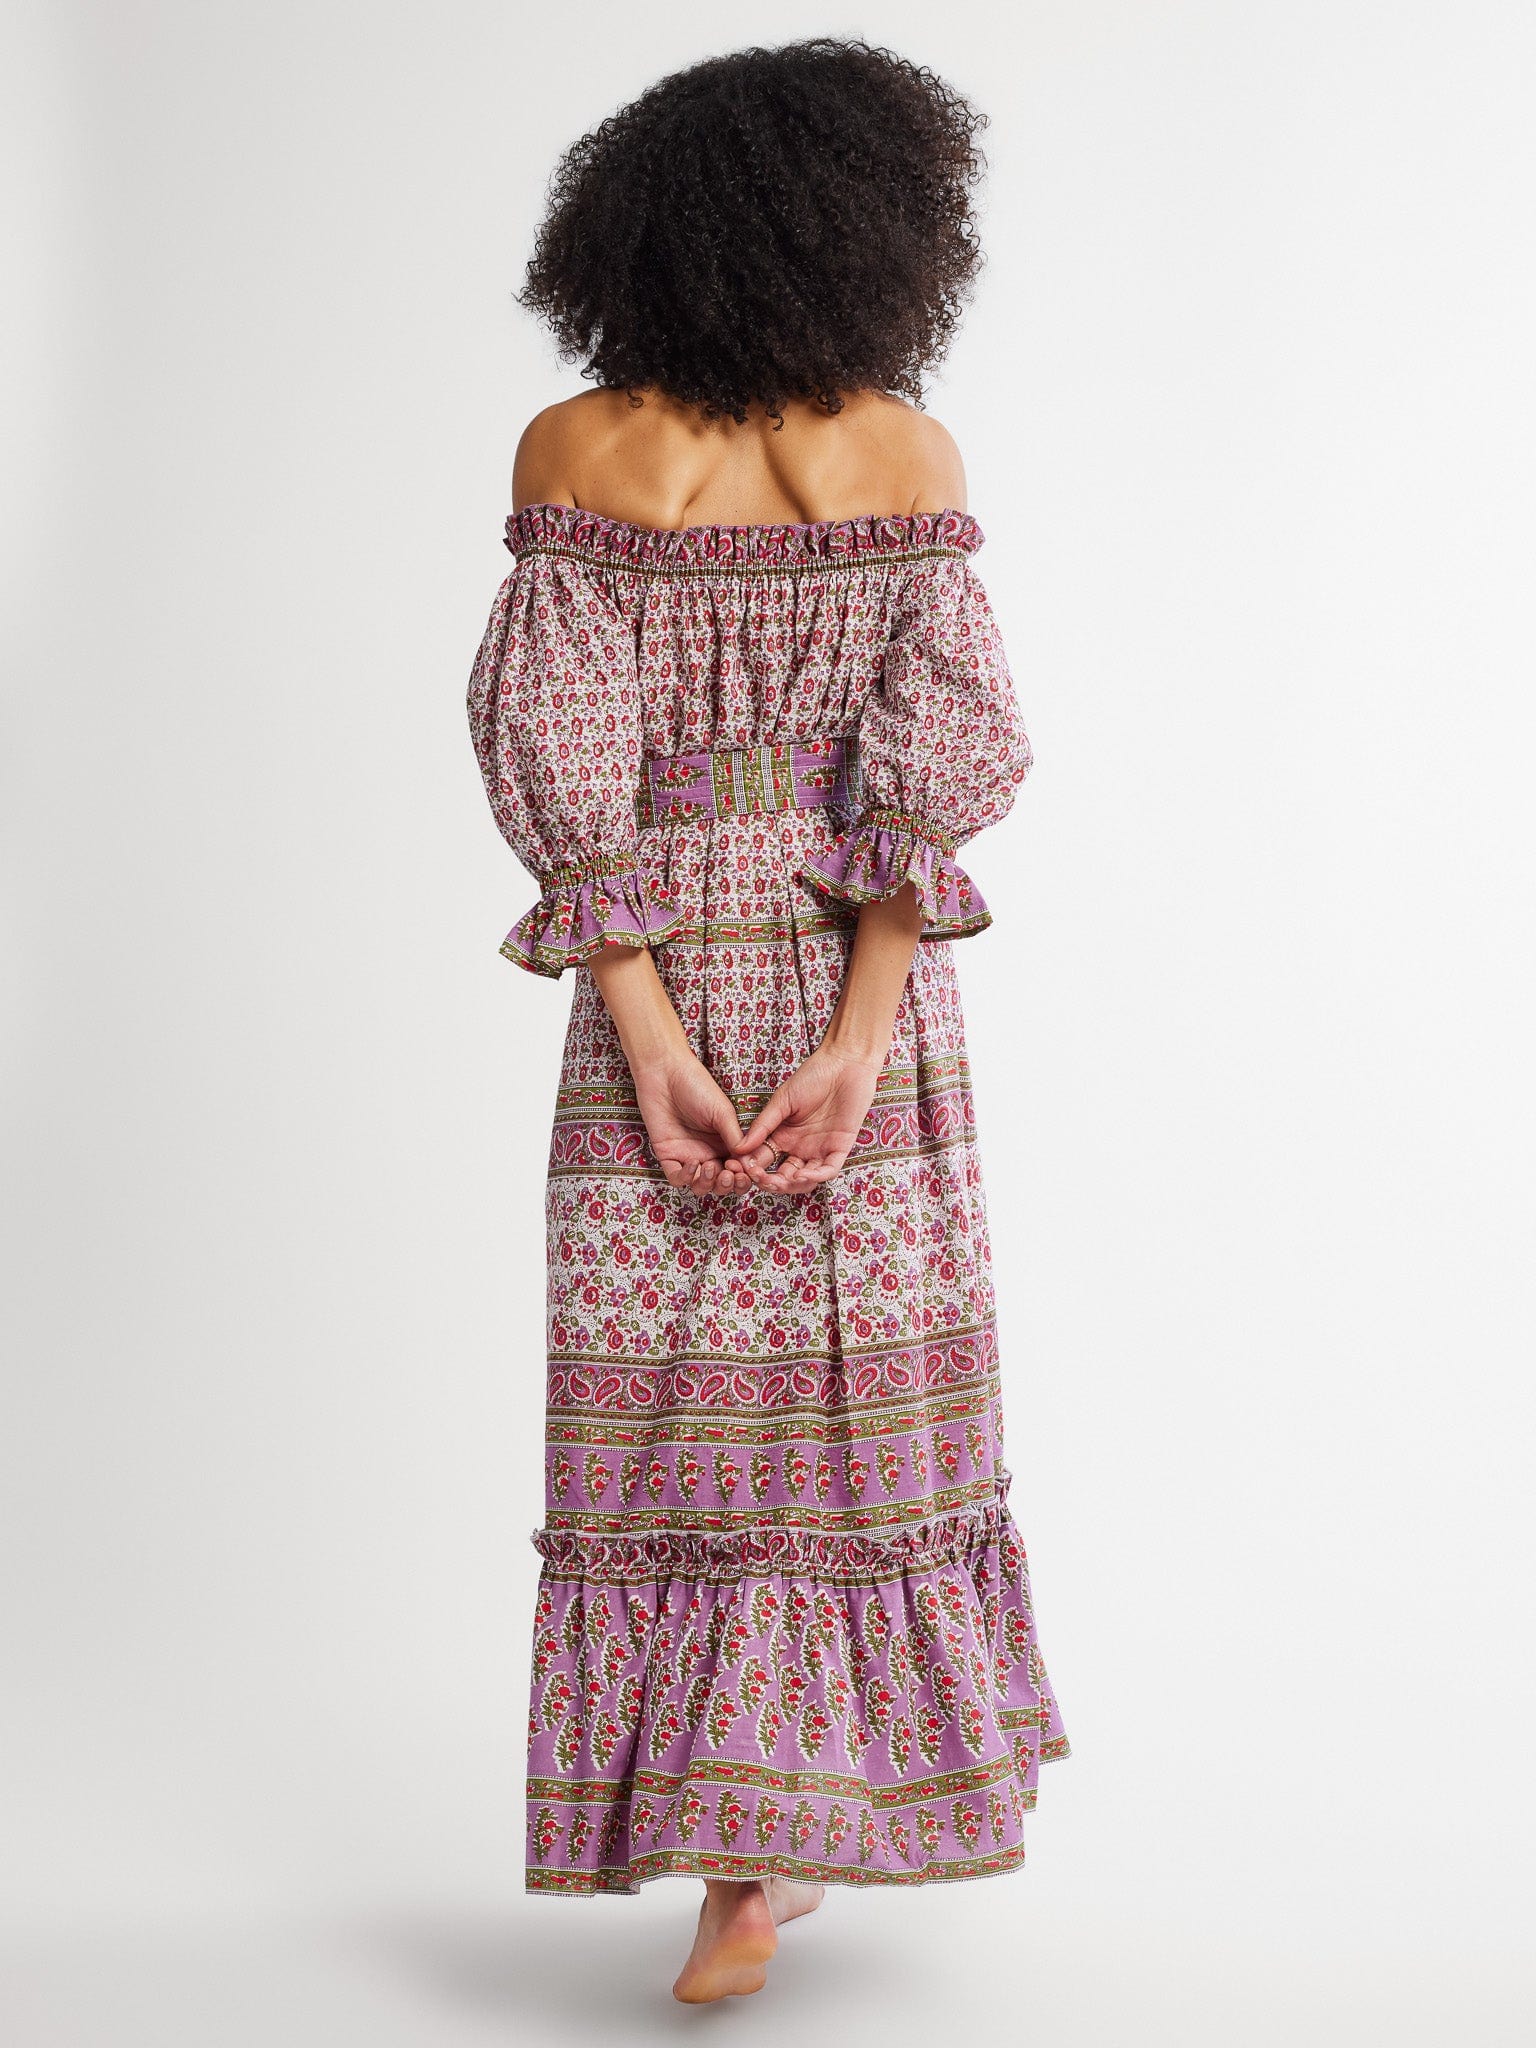 MILLE Clothing Paloma Dress in Heirloom